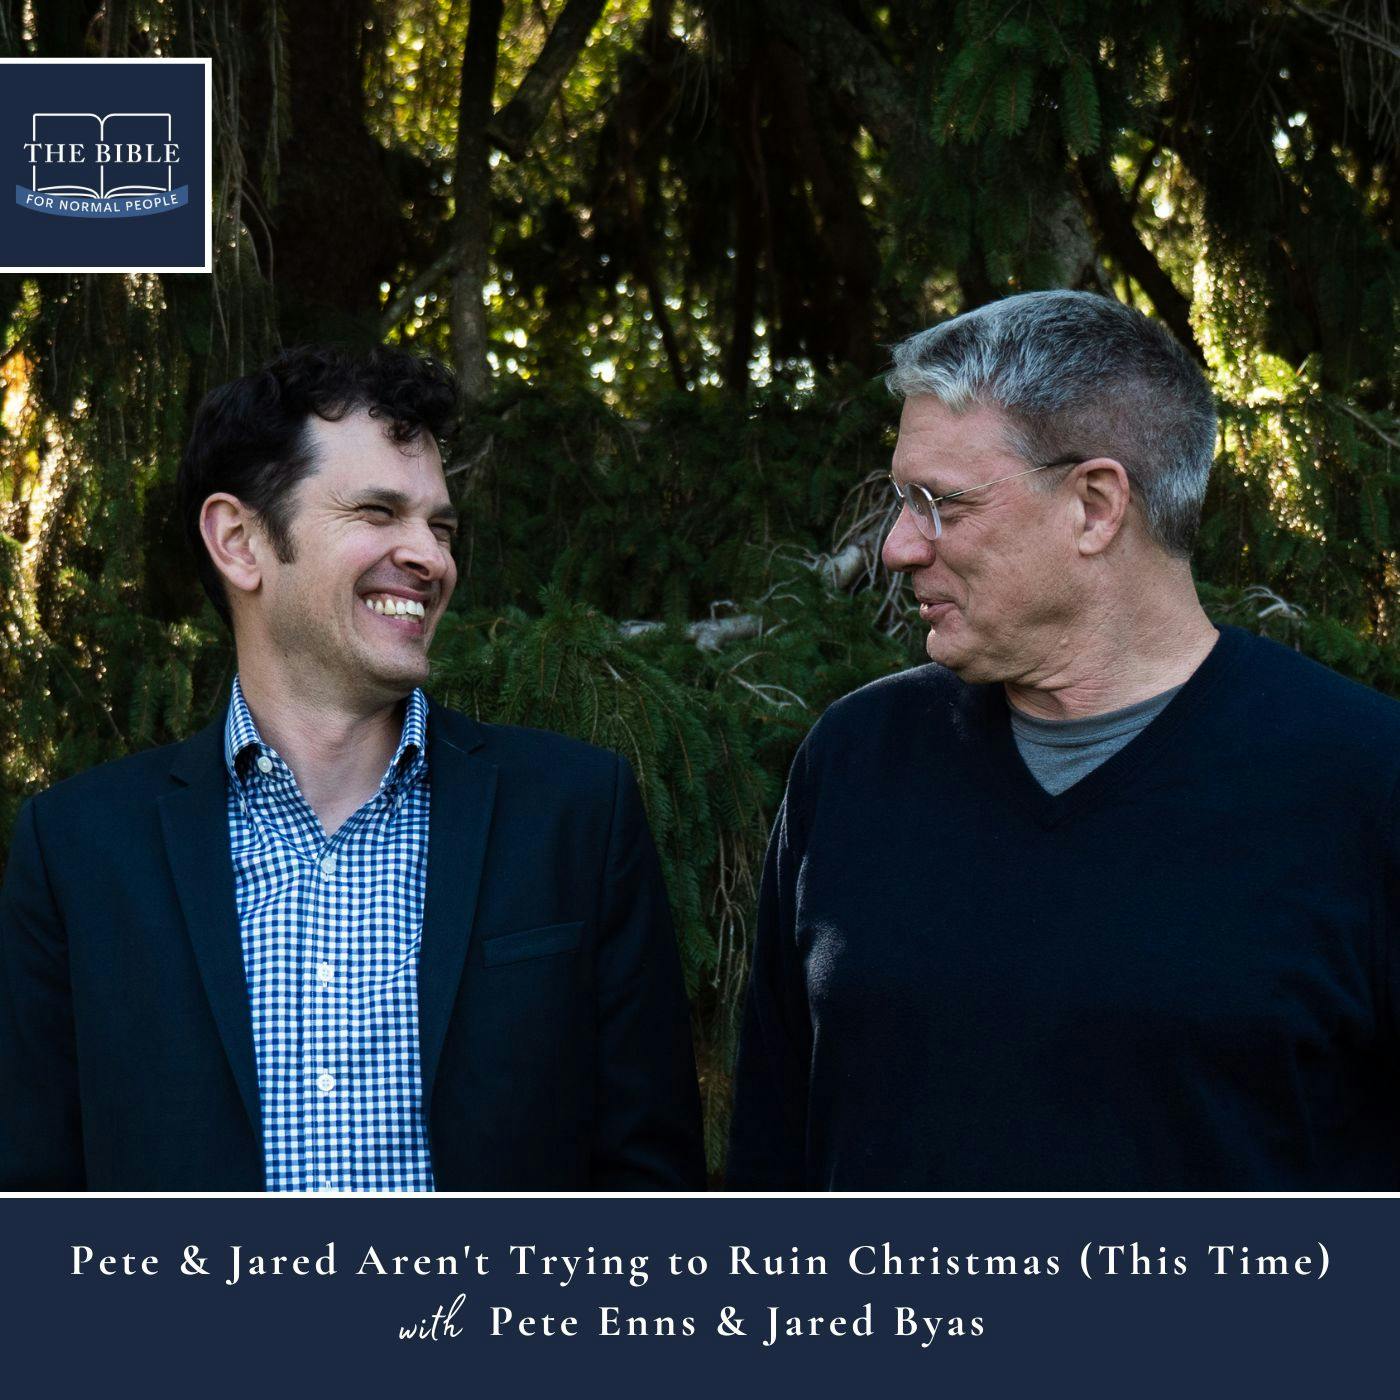 [Bible] Episode 262: Pete Enns & Jared Byas - Pete & Jared Aren’t Trying to Ruin Christmas (This Time)